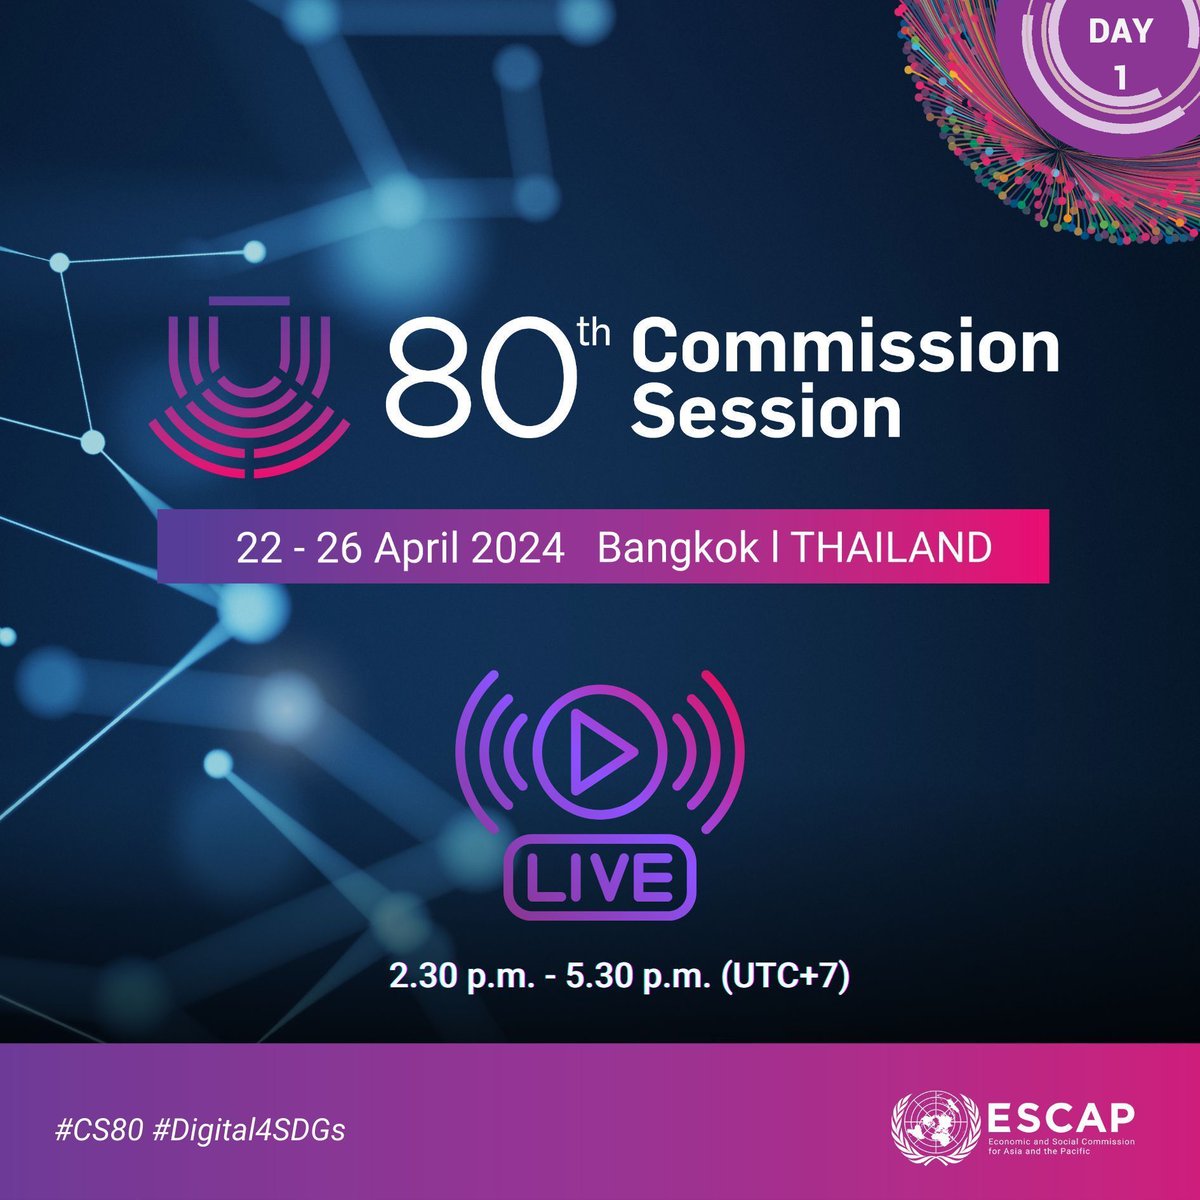 🌟 This afternoon, join us at #CS80 as we continue to explore how best to leverage #DigitalInnovation to drive sustainable development across #AsiaPacific. 

🌏 Don't miss out on this opportunity to follow the debate!

🔗@UNWebTV Livestream: buff.ly/49IeOKn

#Digital4SDGs